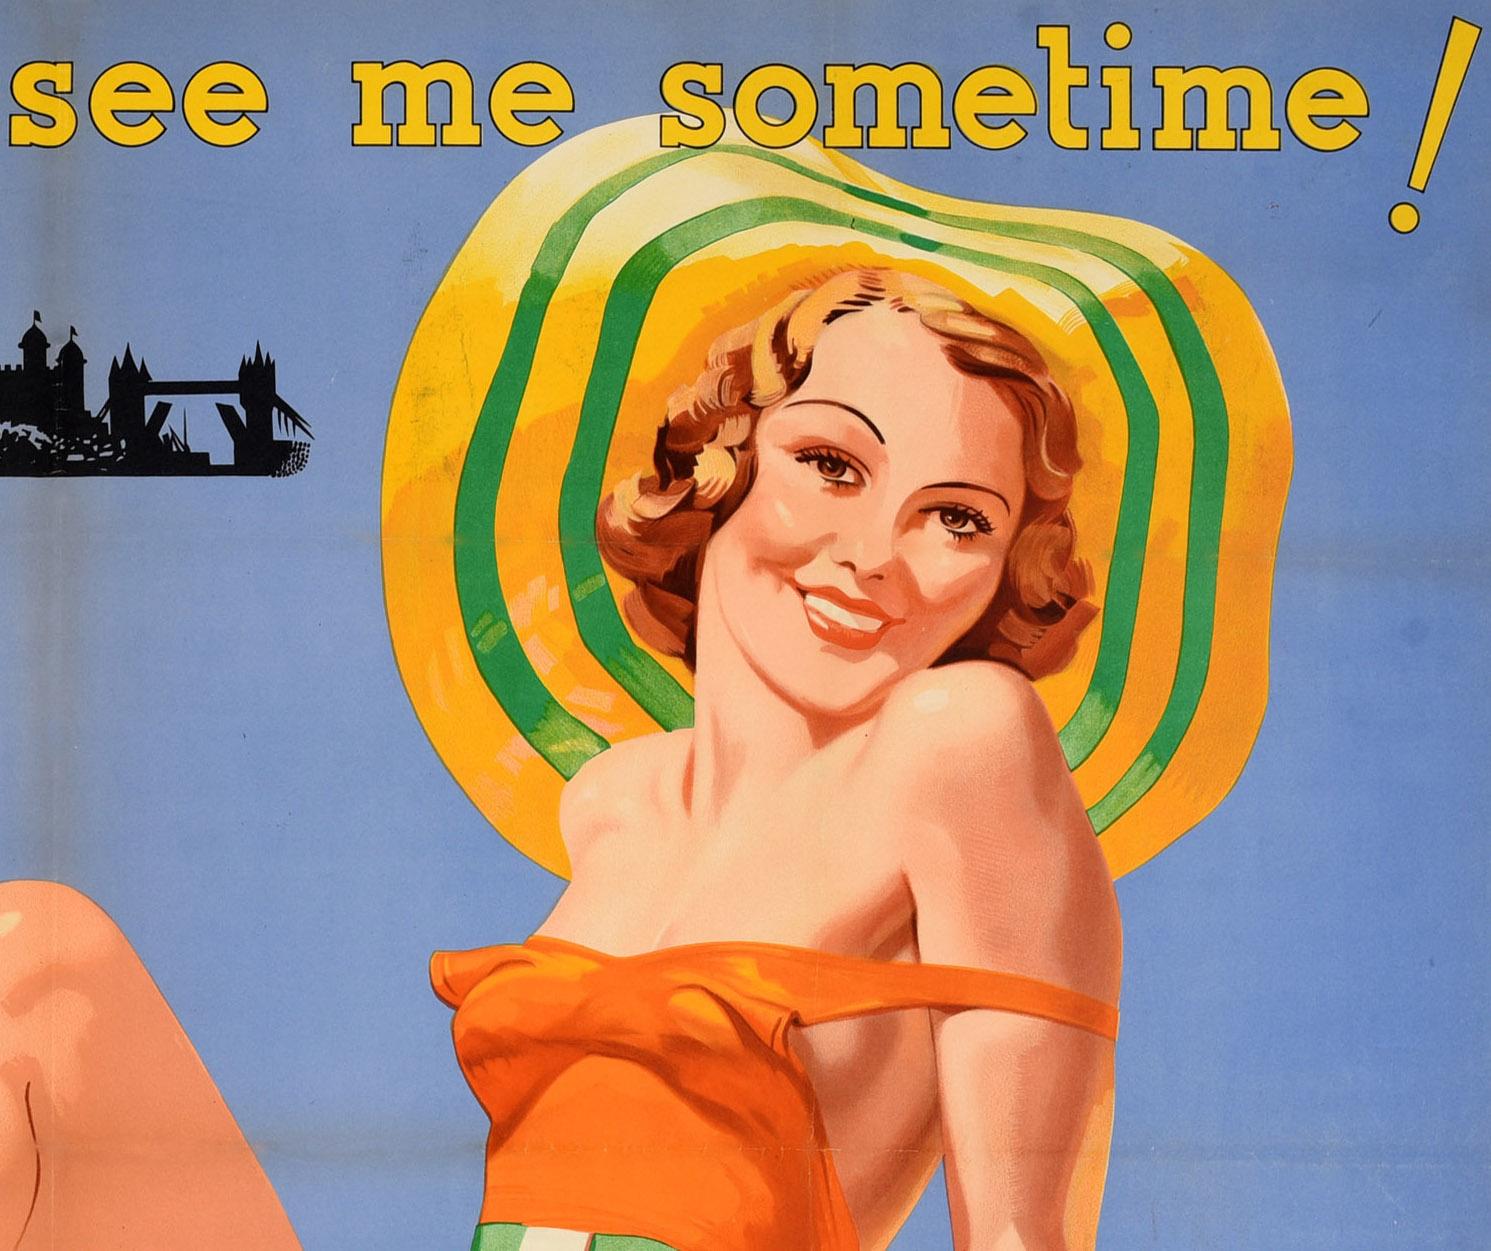 Original vintage train travel poster for Brighton Come down and see me sometime! Stunning design featuring a smiling lady wearing a fashionable orange bathing suit and a green and yellow striped sun hat leaning back on the beach and looking at the